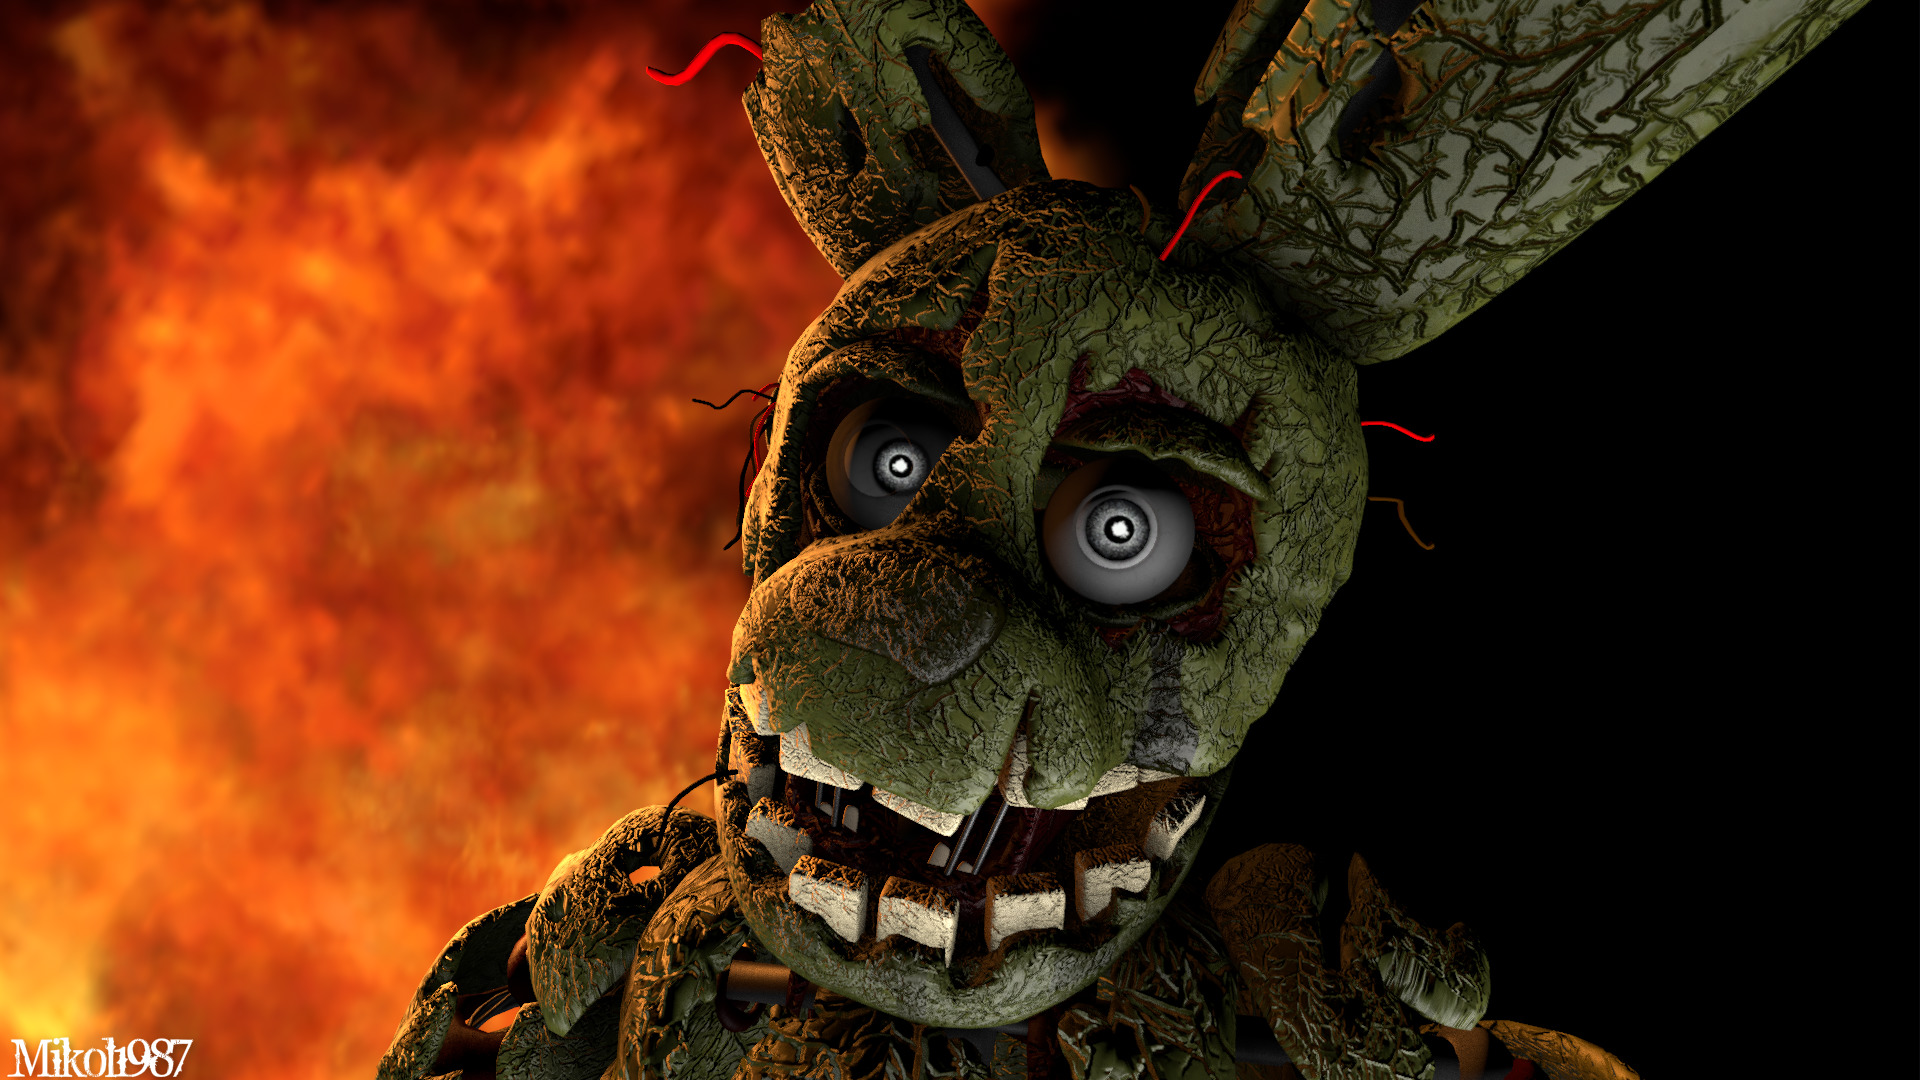 Five Nights at Freddy's 3 Download for Free